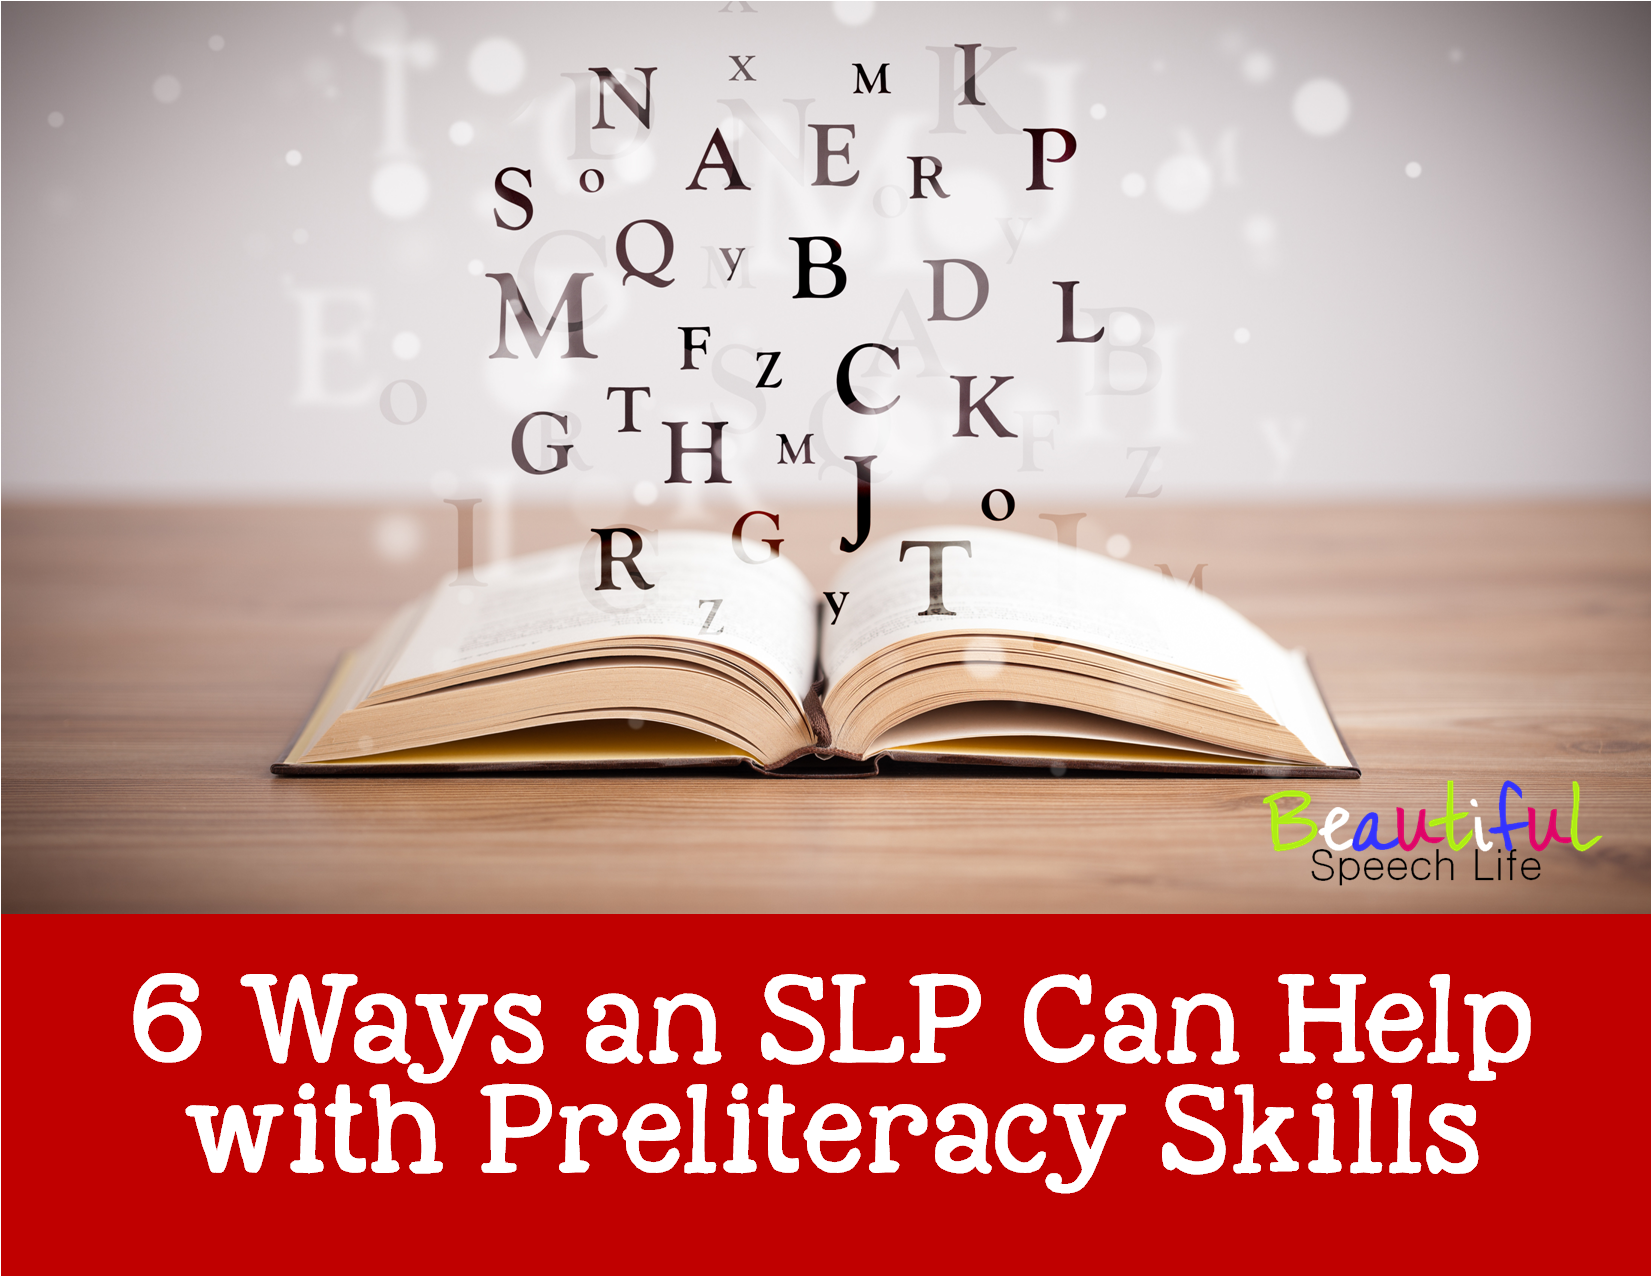 6 Ways an SLP Can Help with Preliteracy Skills